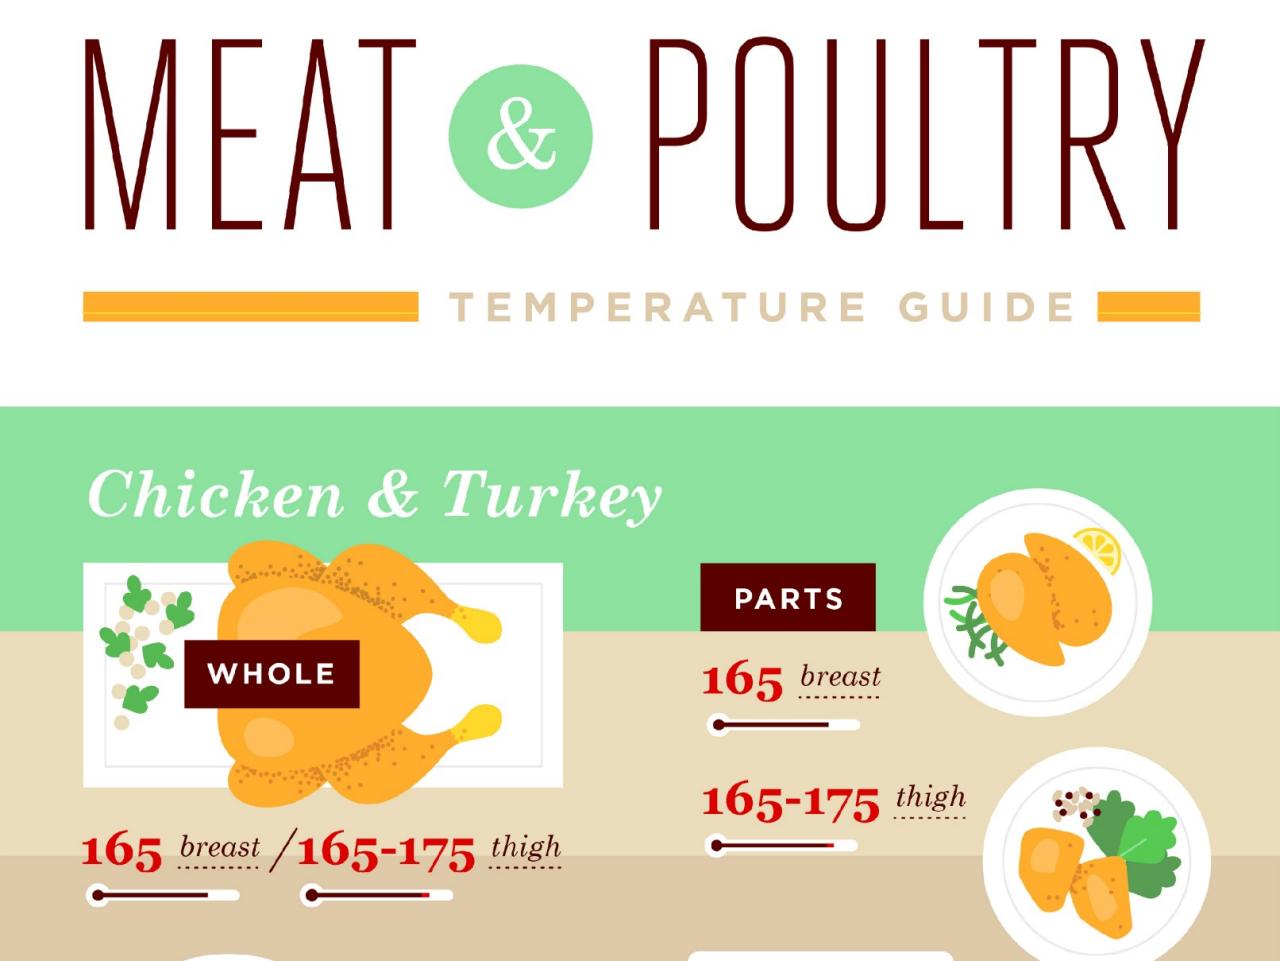 https://food.fnr.sndimg.com/content/dam/images/food/fullset/2015/5/20/0/FN_Infographic-Meat-and-Poultry-Temperature-Guide-Promo.jpg.rend.hgtvcom.1280.960.suffix/1432137784318.jpeg